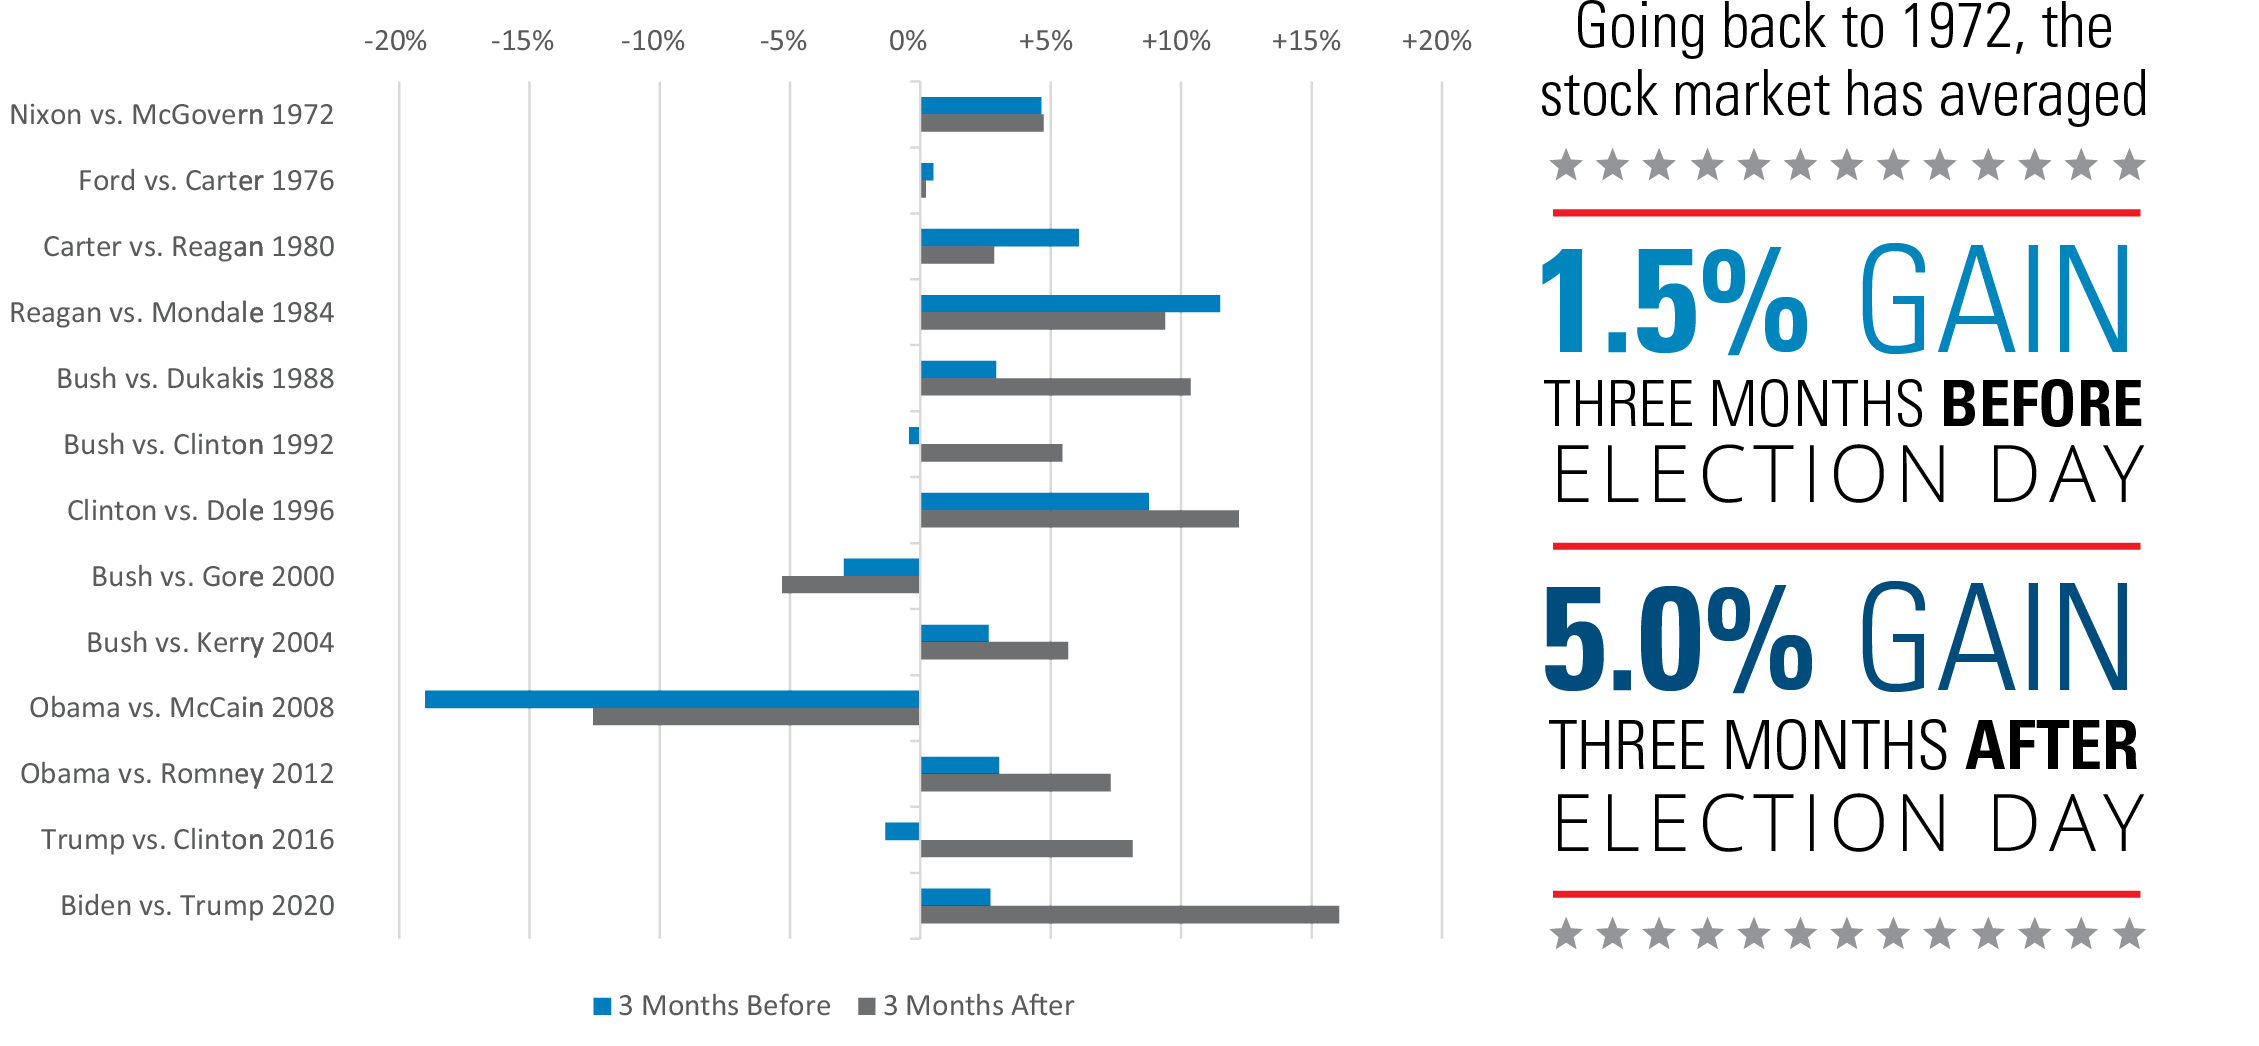 SP500 Index Percent Returns Three Months Before and After Presidential Elections